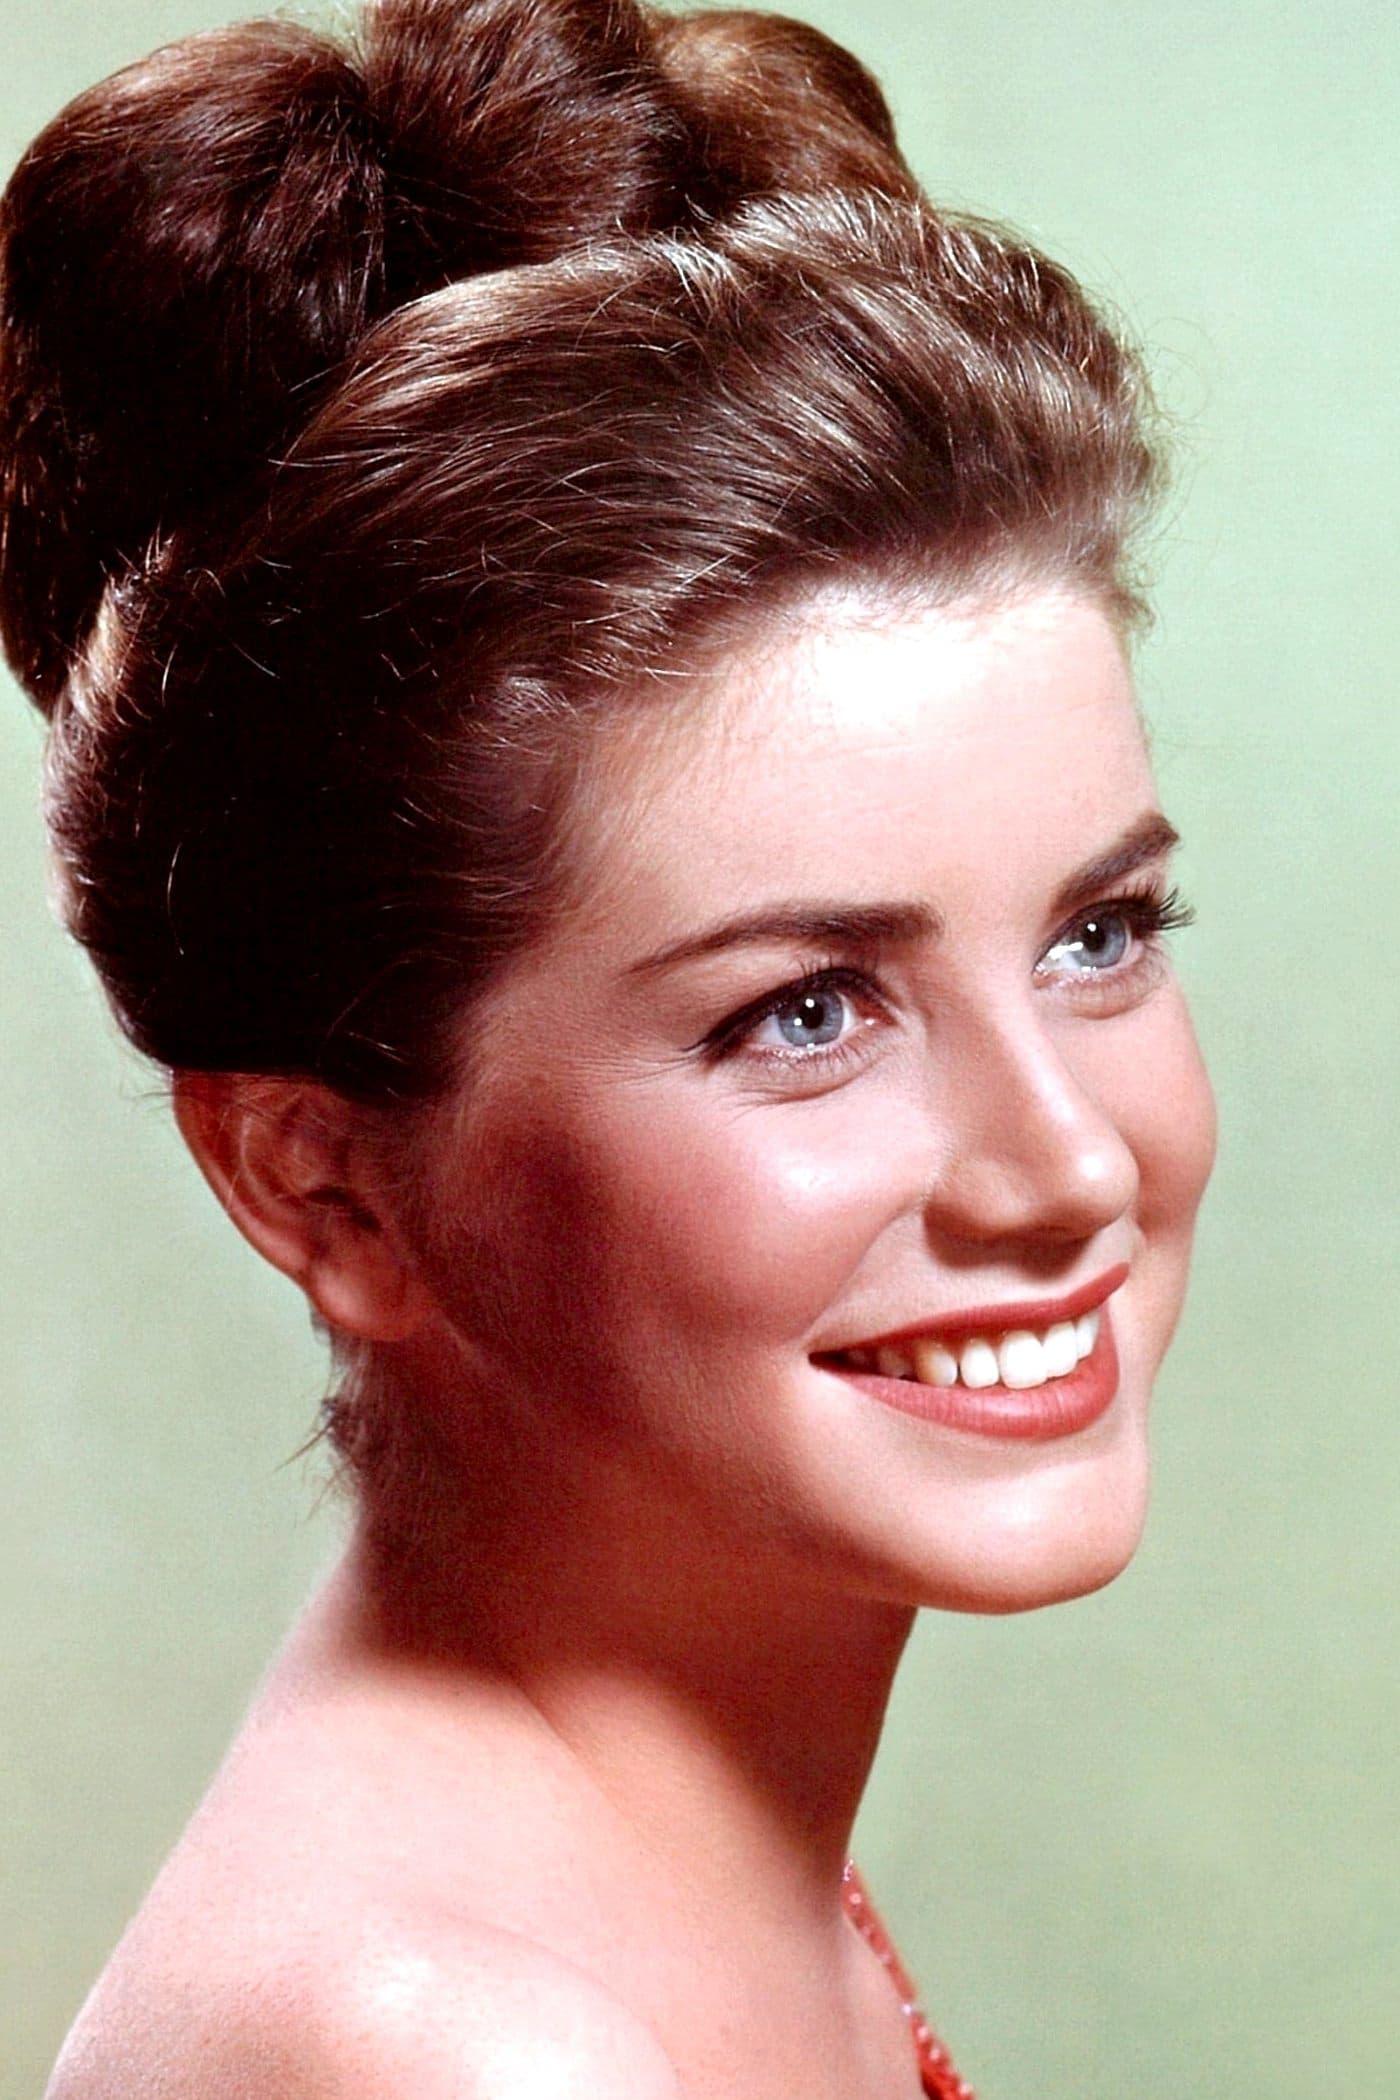 Dolores Hart | Susan Jessup (archive footage) (uncredited)